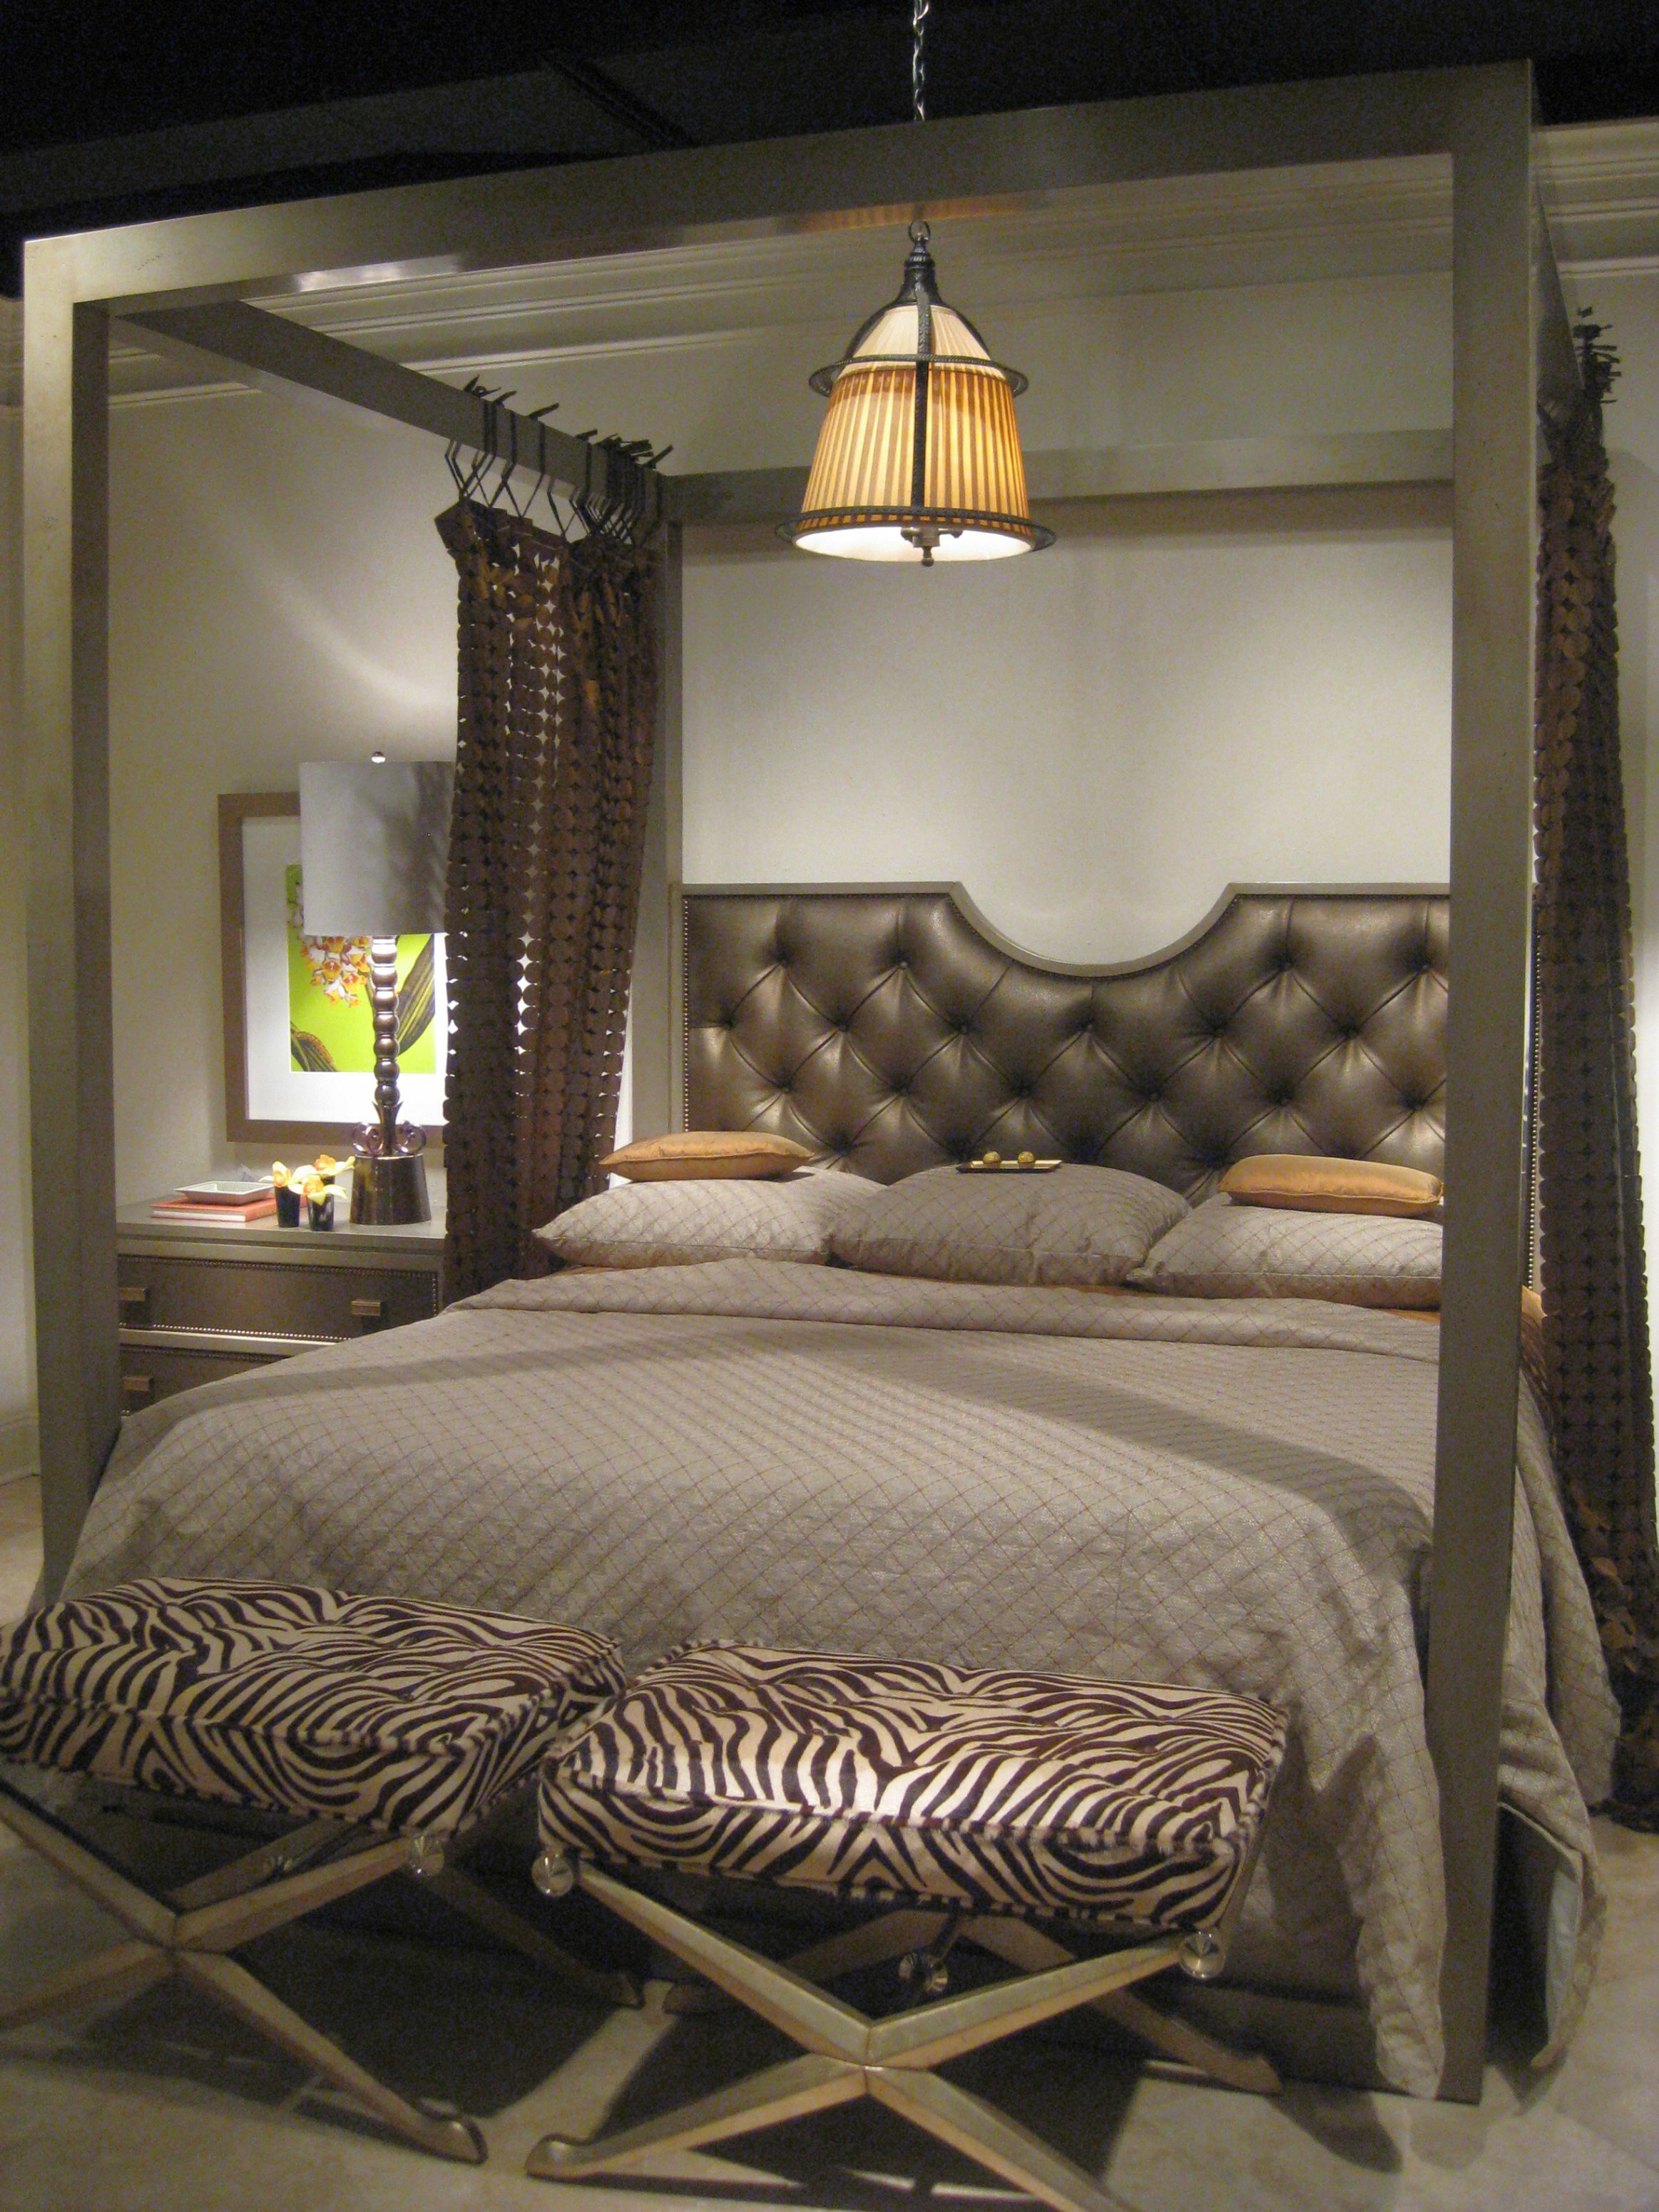 Canopy Bed Pillows